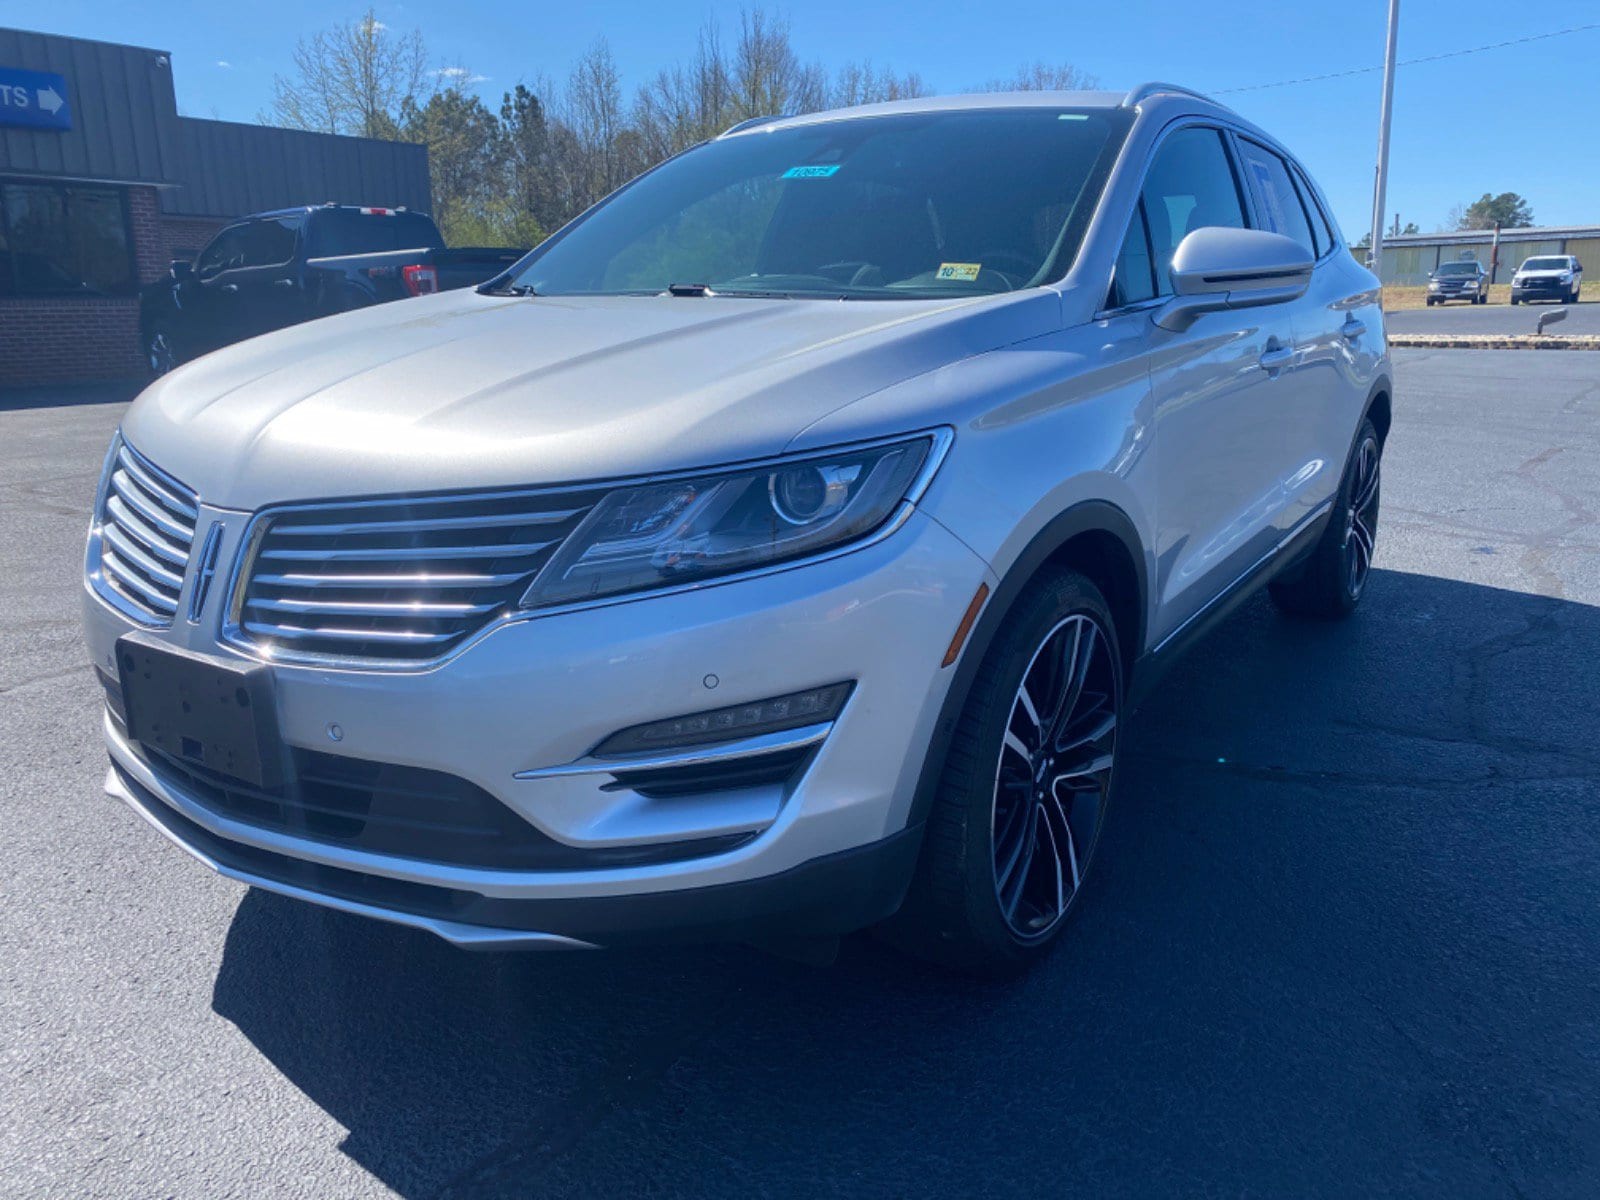 Used 2018 Lincoln MKC For Sale at Hardee Ford | VIN: 5LMTJ3DH1JUL20233